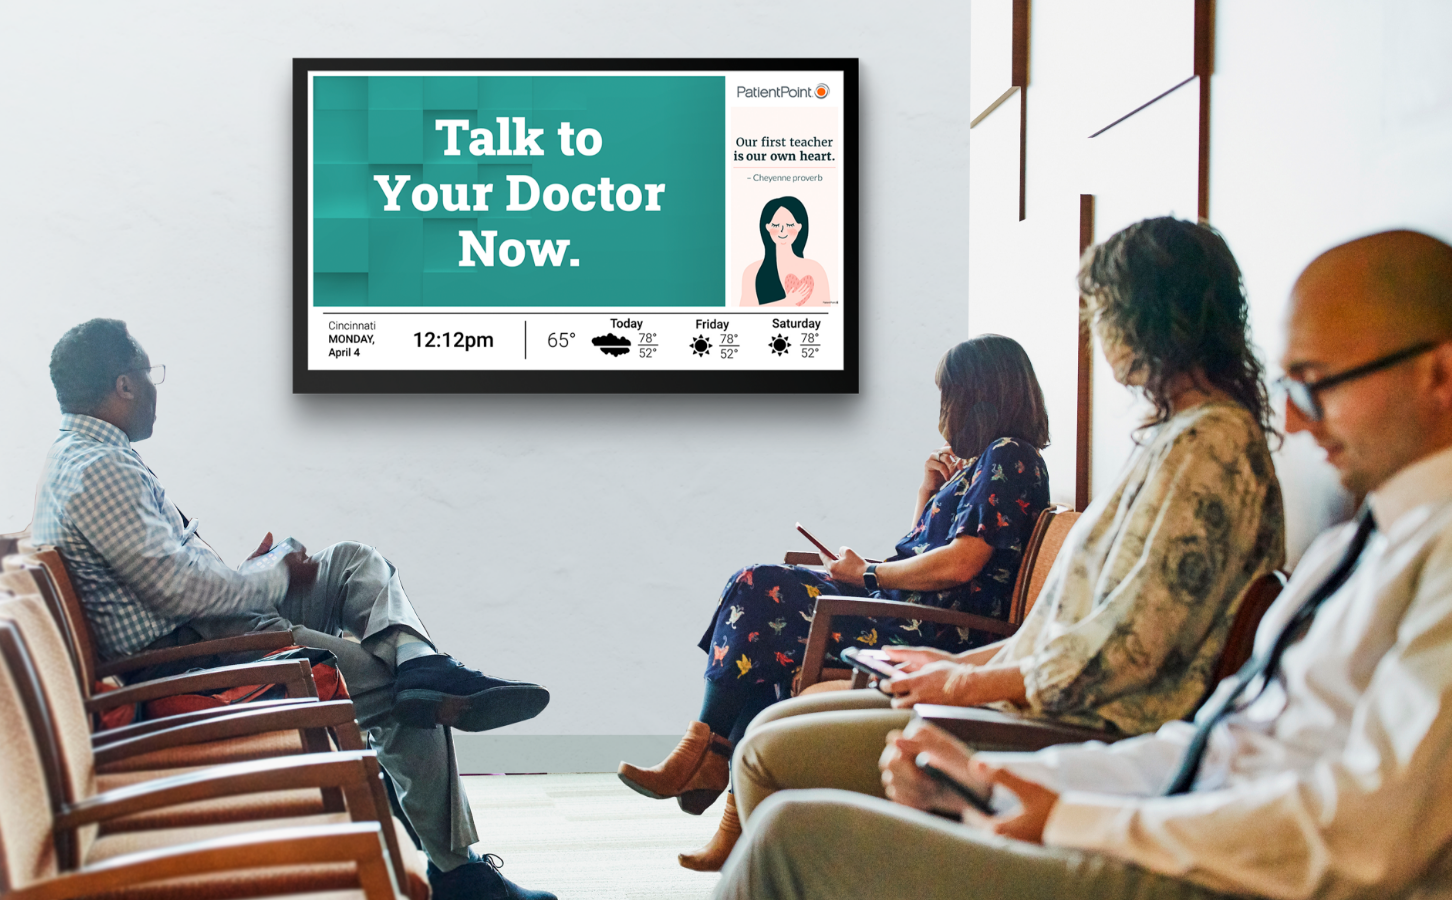 Doctor's office waiting room with patients looking at message on digital screen